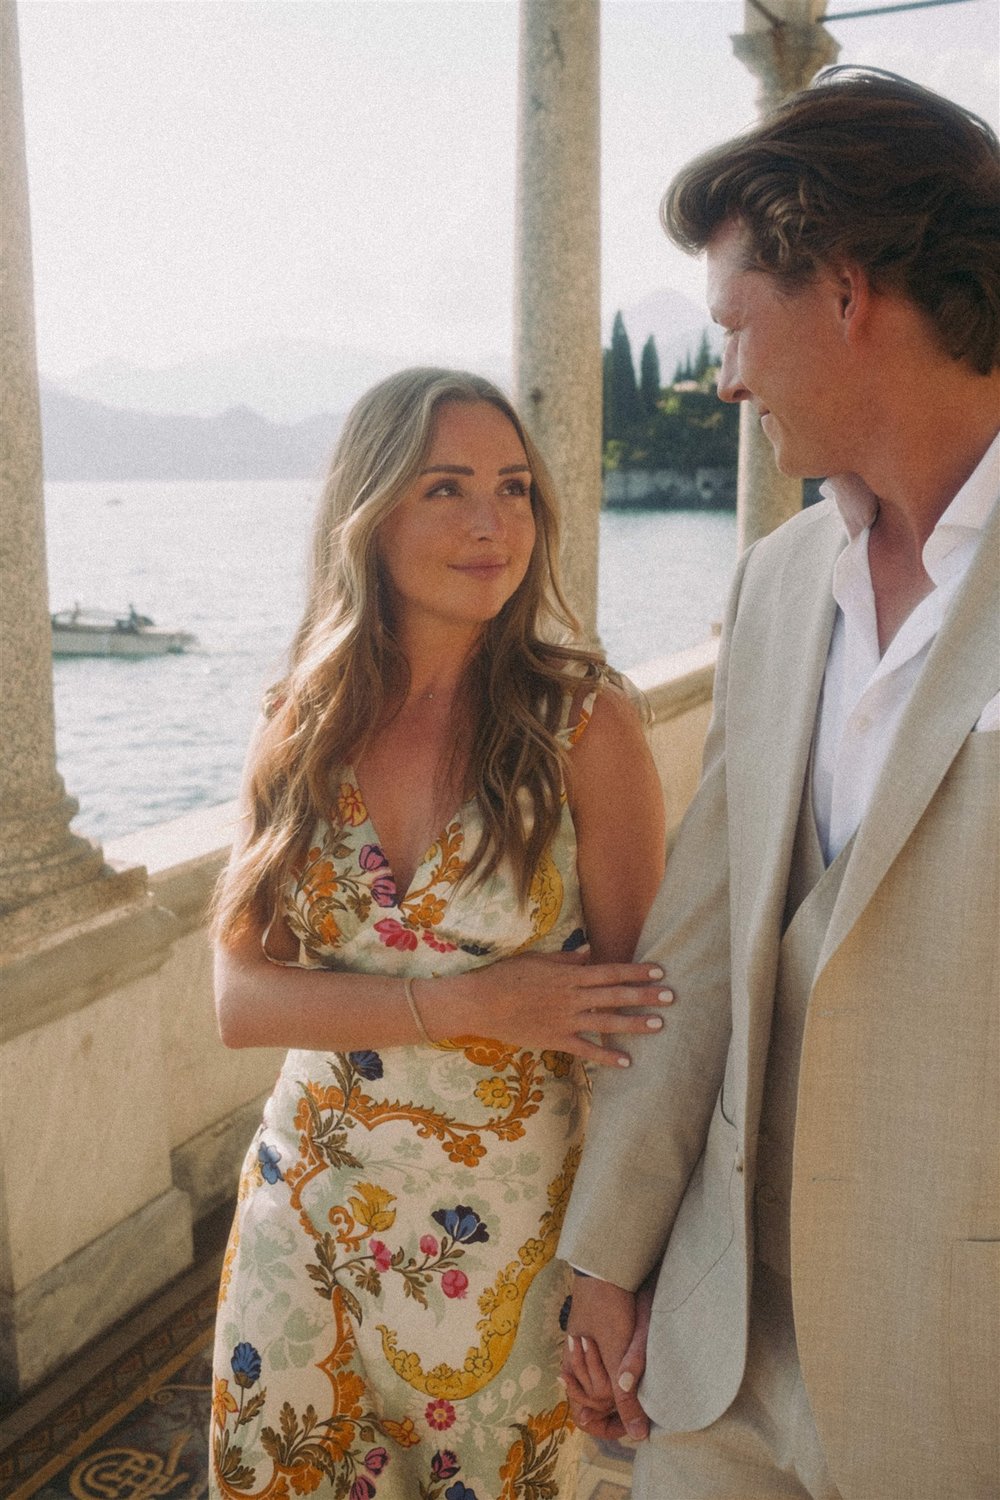 save the date engagement photos lake como italy